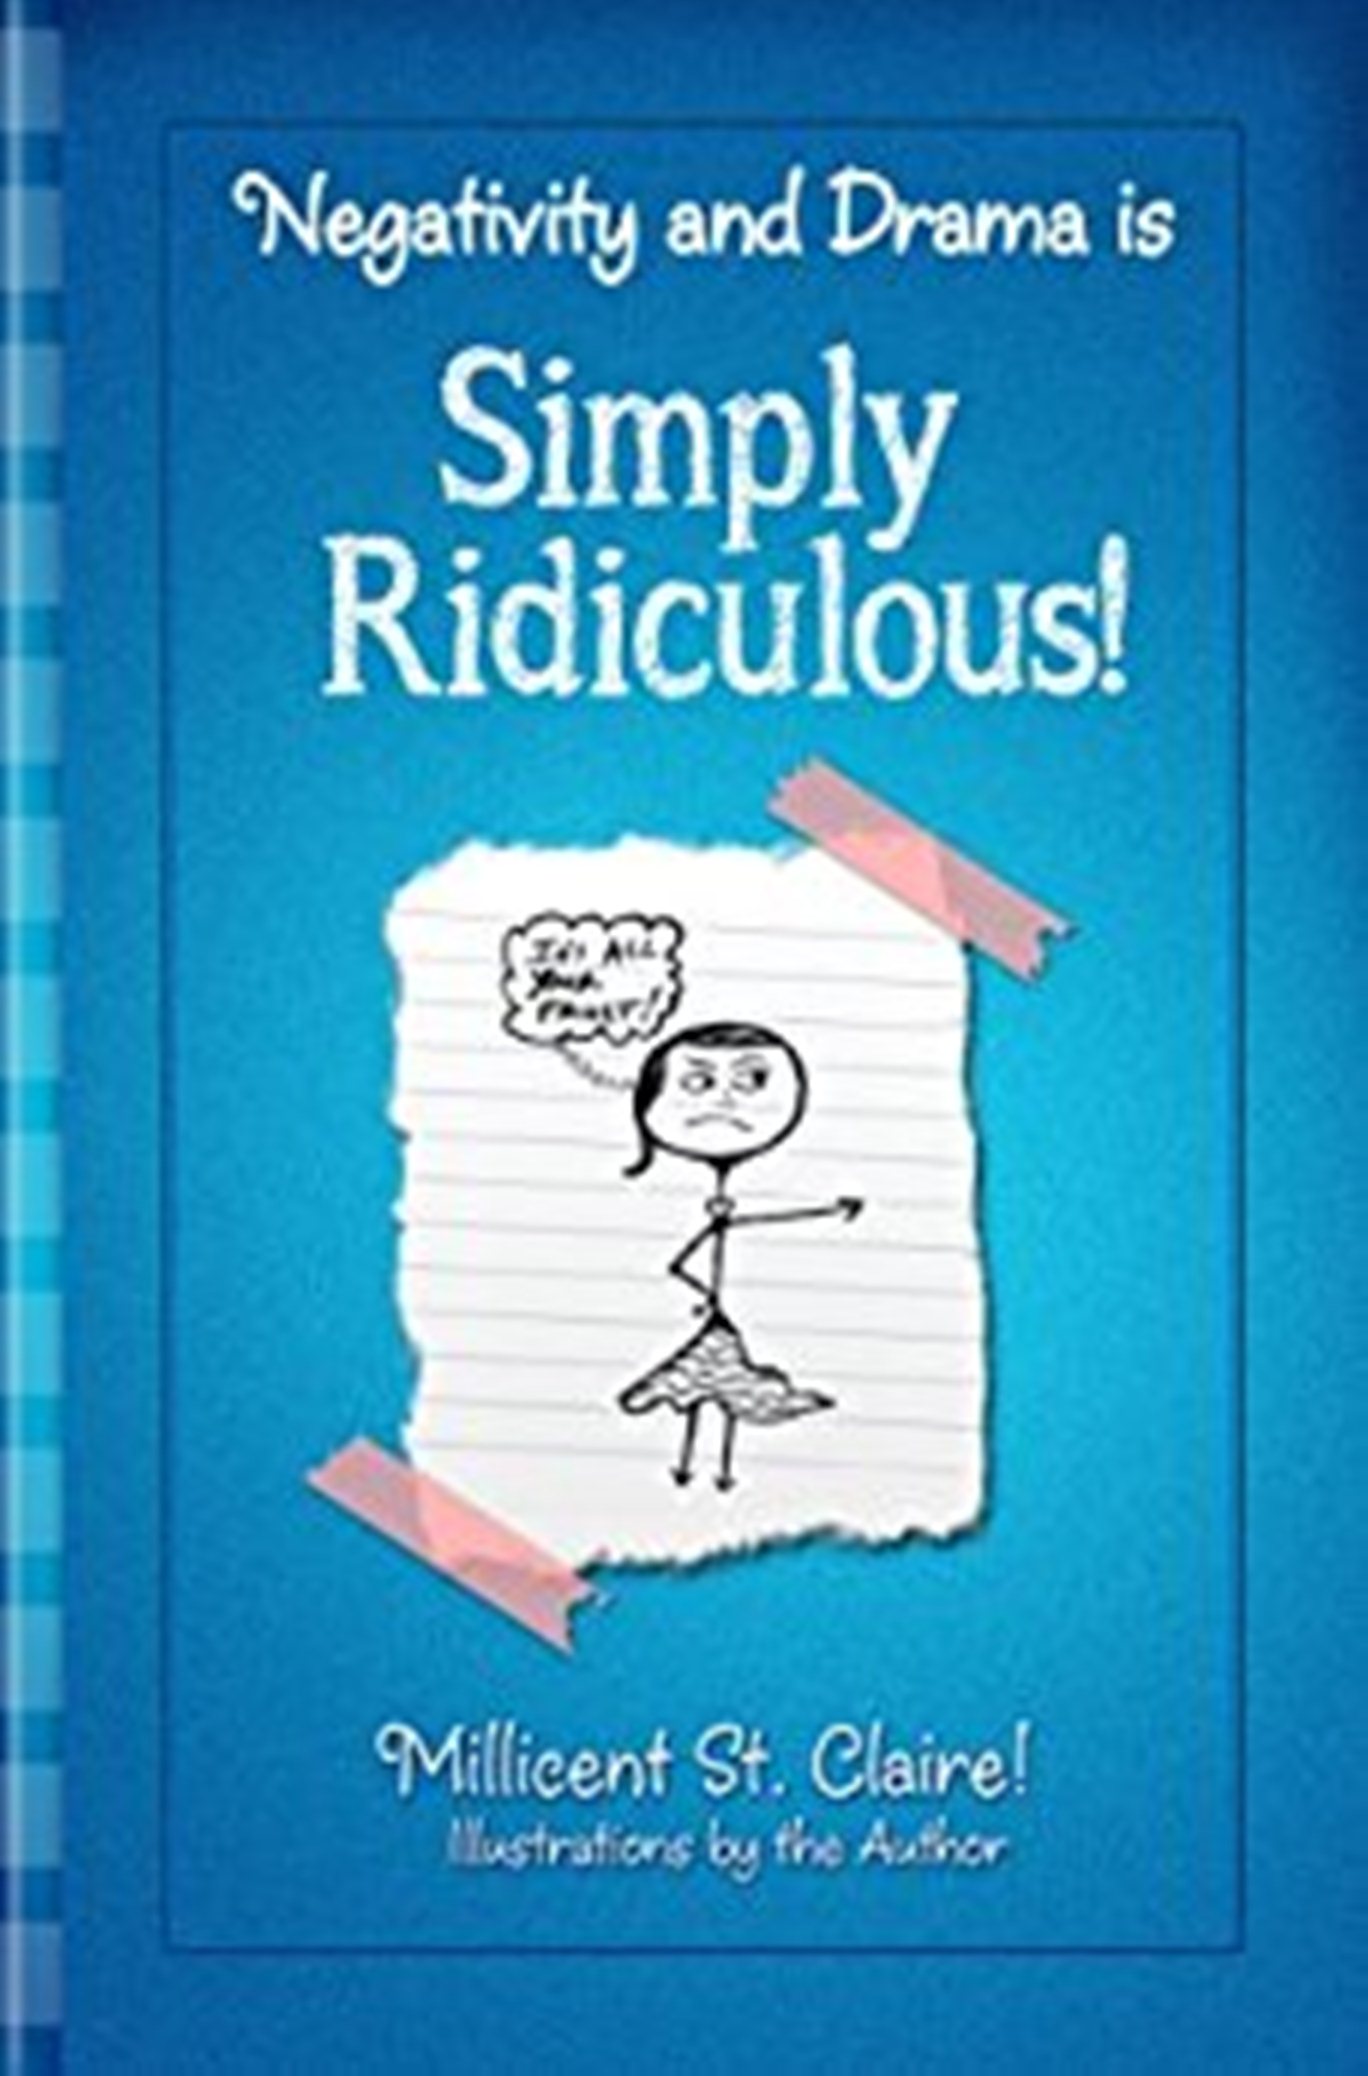 FREE: Negativity and Drama is Simply Ridiculous! by Millicent St Claire